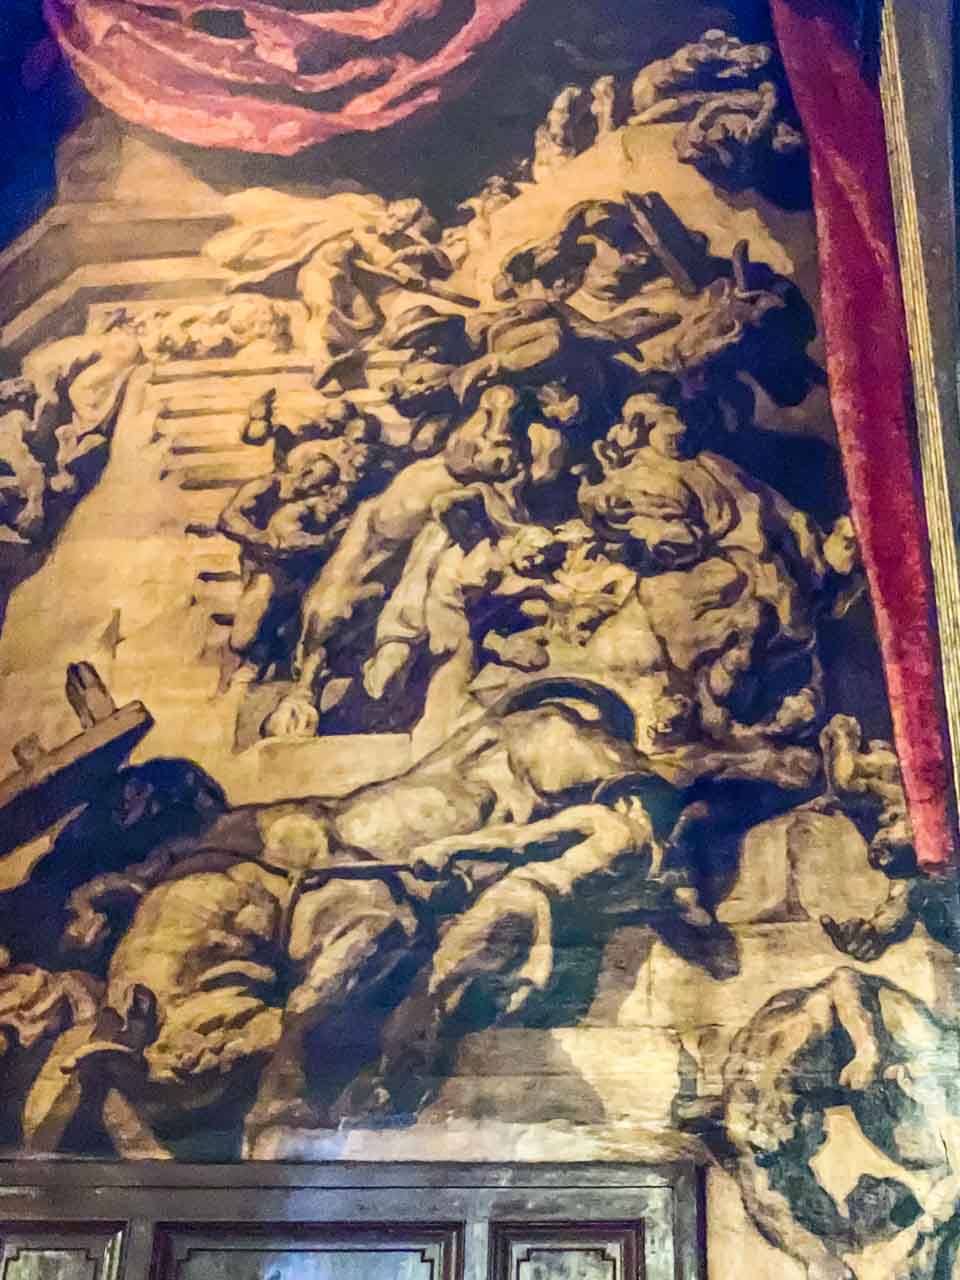 A painting inside a cathedral representing the mystery of redemption.